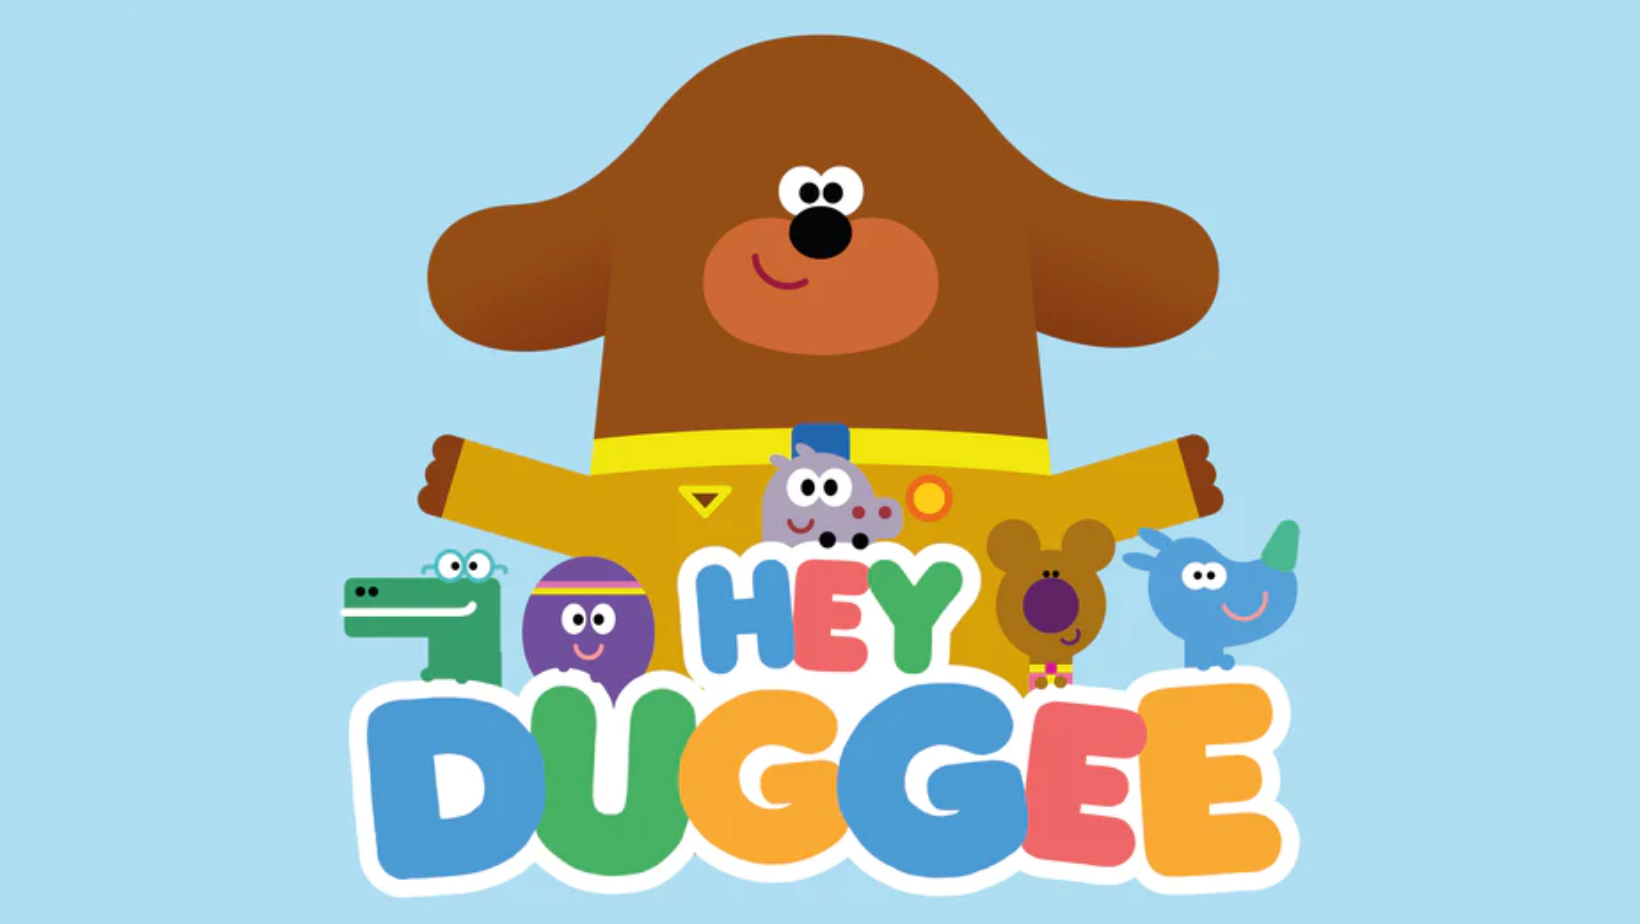 Woof! Woooof! Let us meet the characters and cast of Hey Duggee.